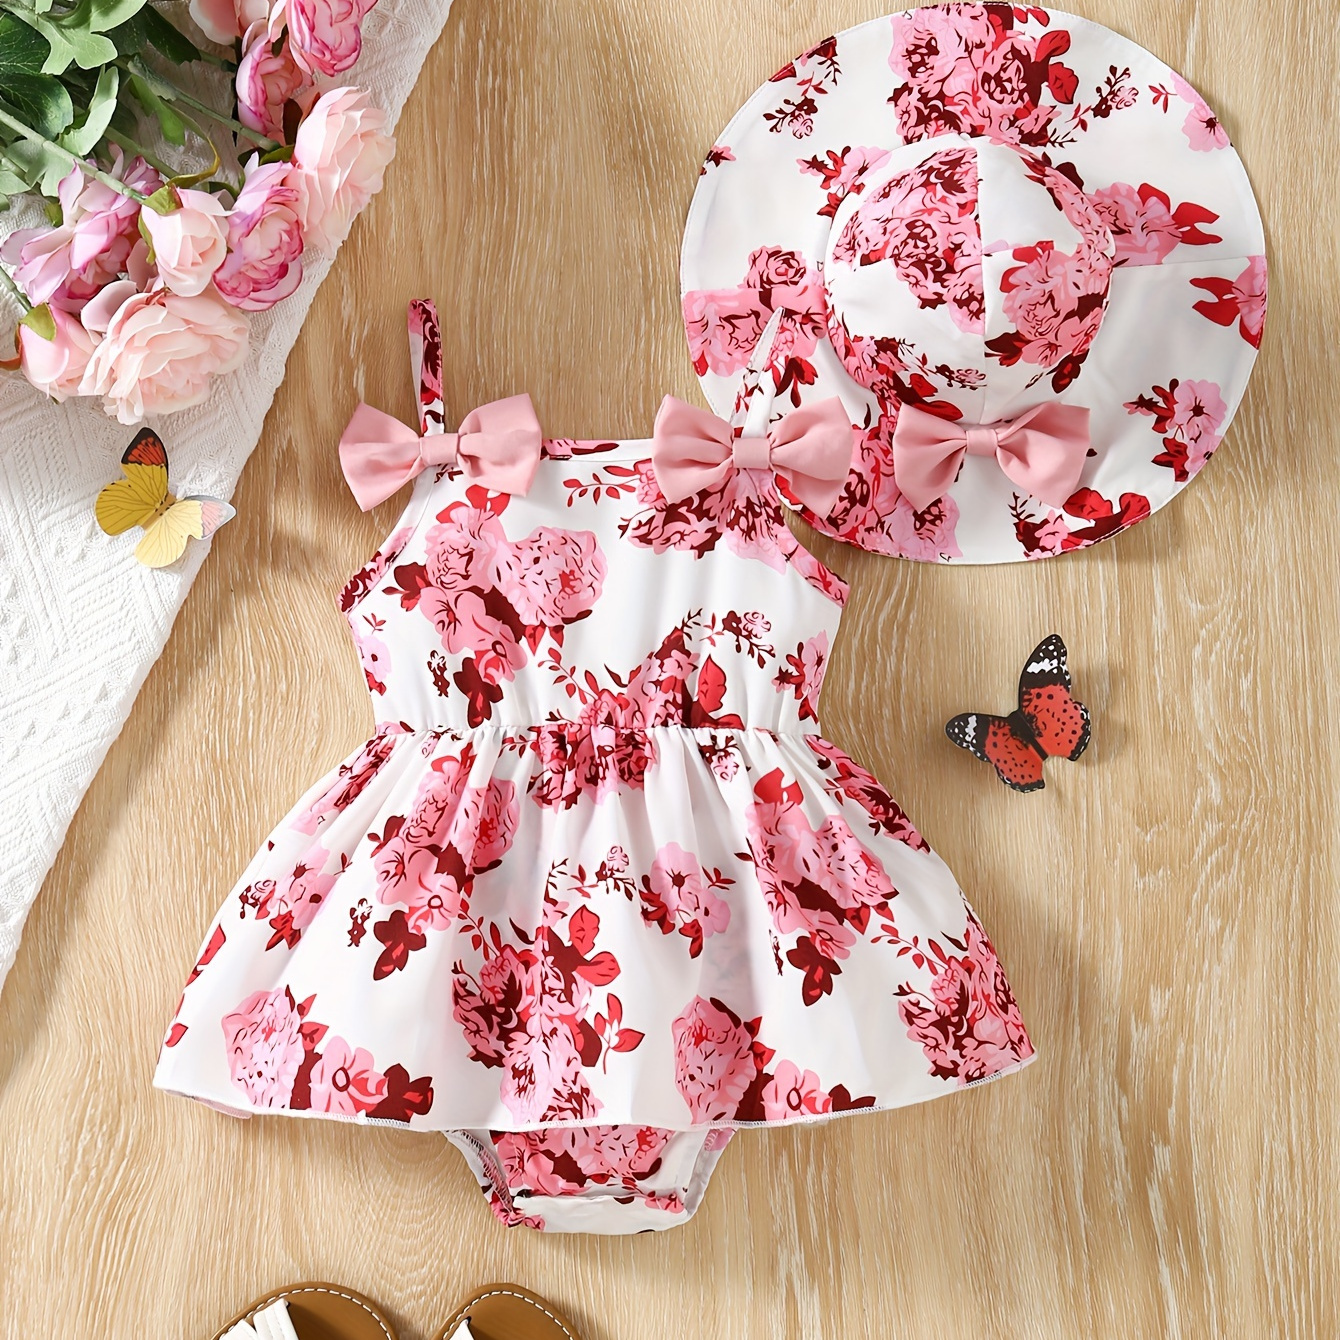 

Infant's Summer Floral Bodysuit Set, Bowknot Decor Ruffle Cami Romper With Matching Hat Set, Baby Girls Clothing